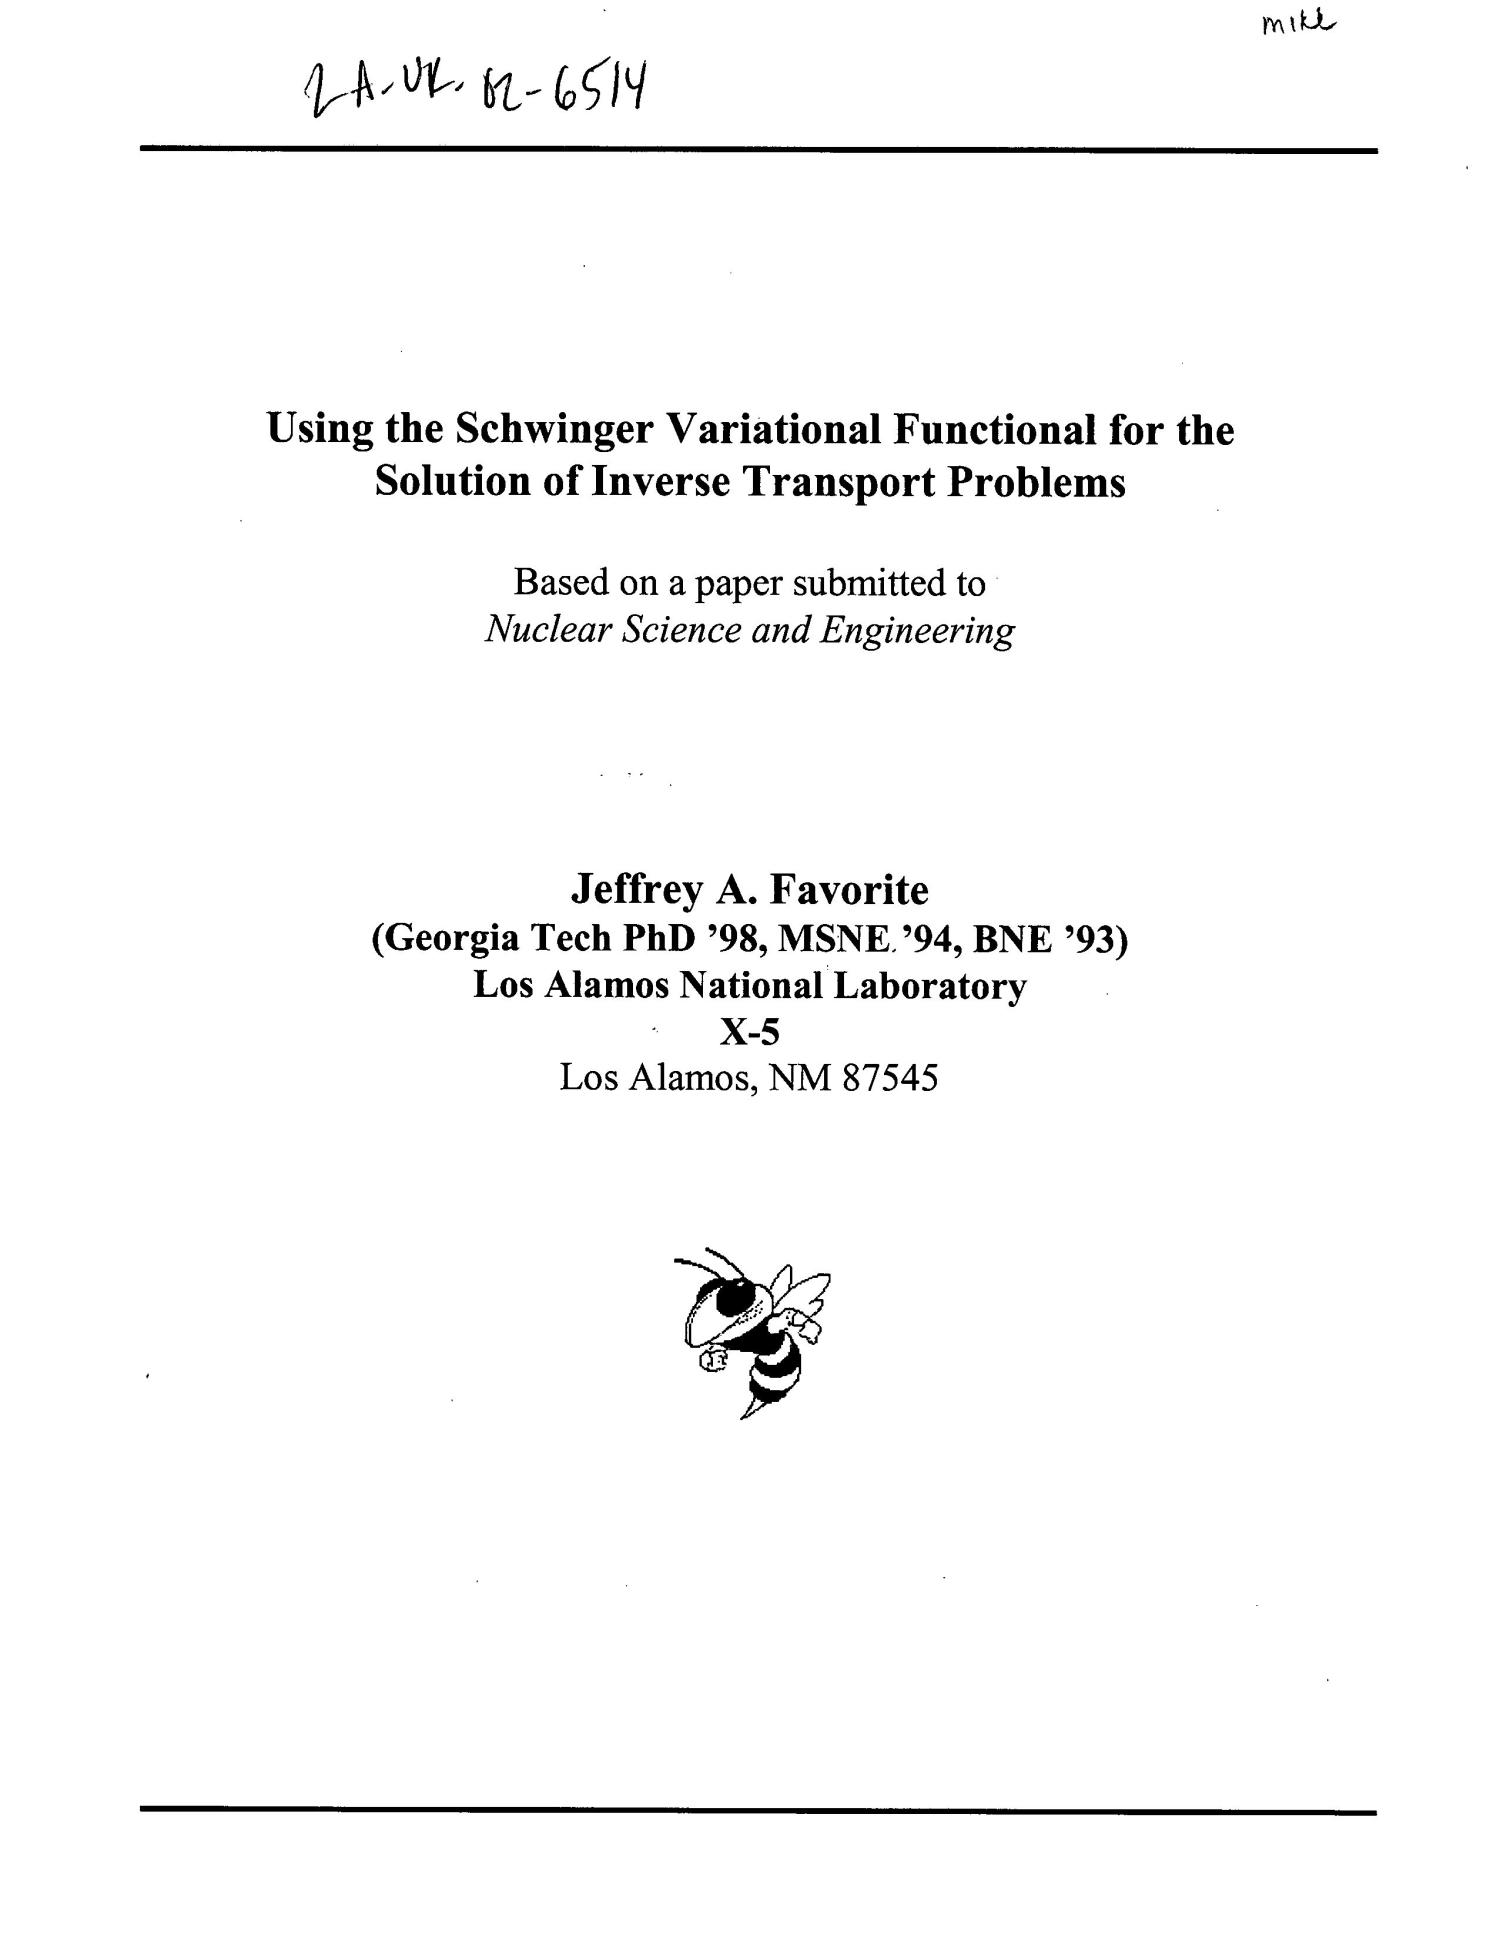 Using the Schwinger variational functional for the solution of inverse transport problems
                                                
                                                    [Sequence #]: 2 of 19
                                                